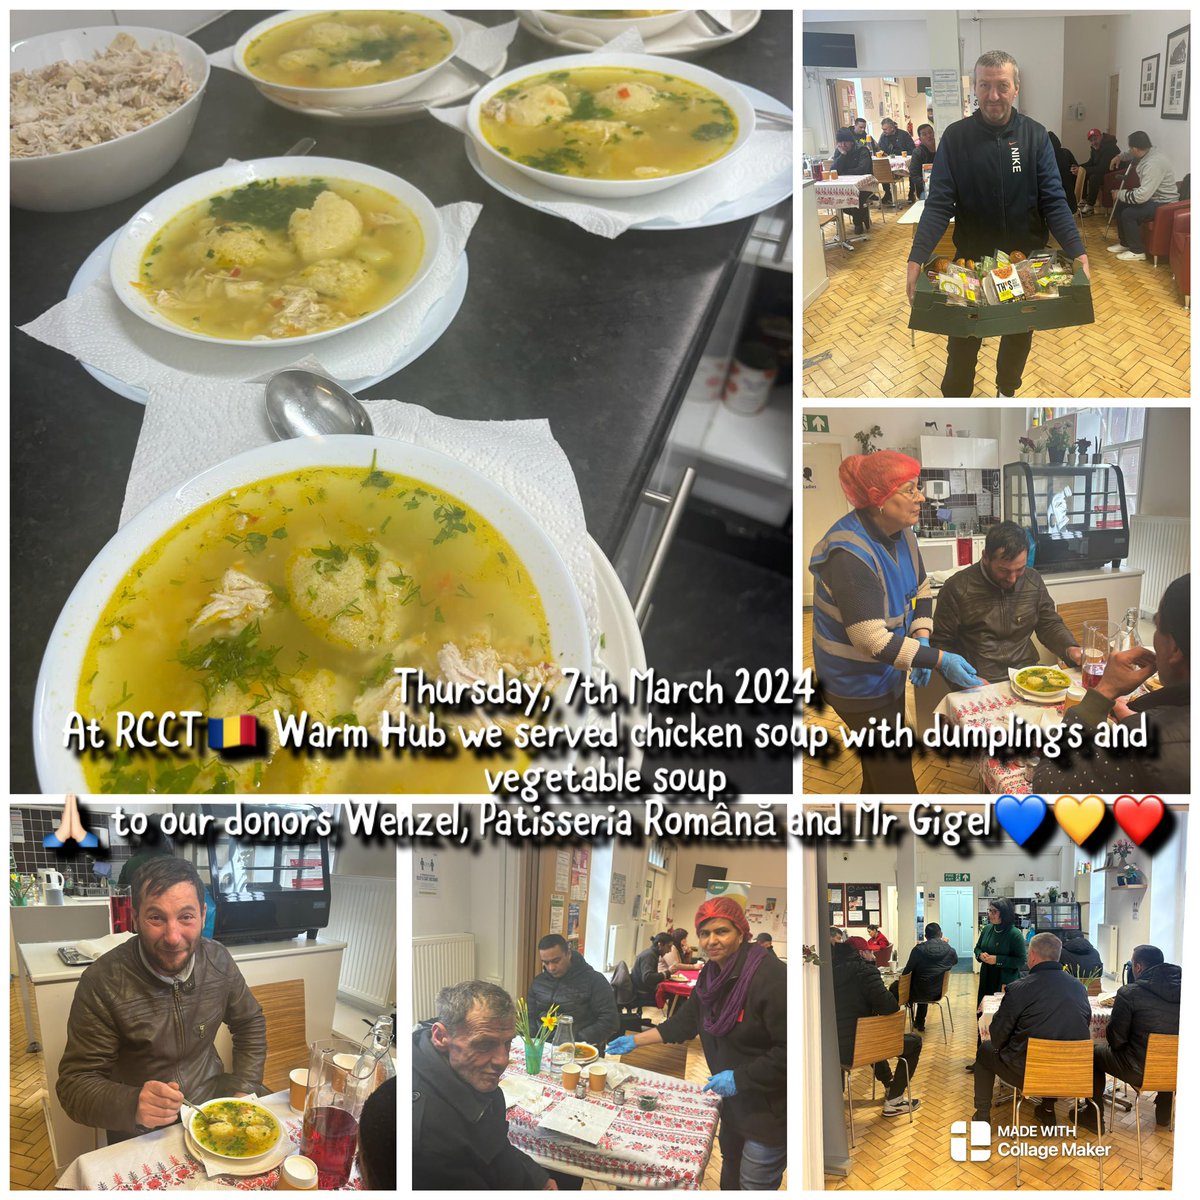 Warm, freshly cooked food for vegetarians &meat eaters hungry for a healthy traditional Romanian soup🇷🇴 Our Chef Mariana & Kitchen Assistant Rihana have been working together with Dana, Violeta, Constantin & Flaviana to help create a friendly atmosphere & a positive environment🤝